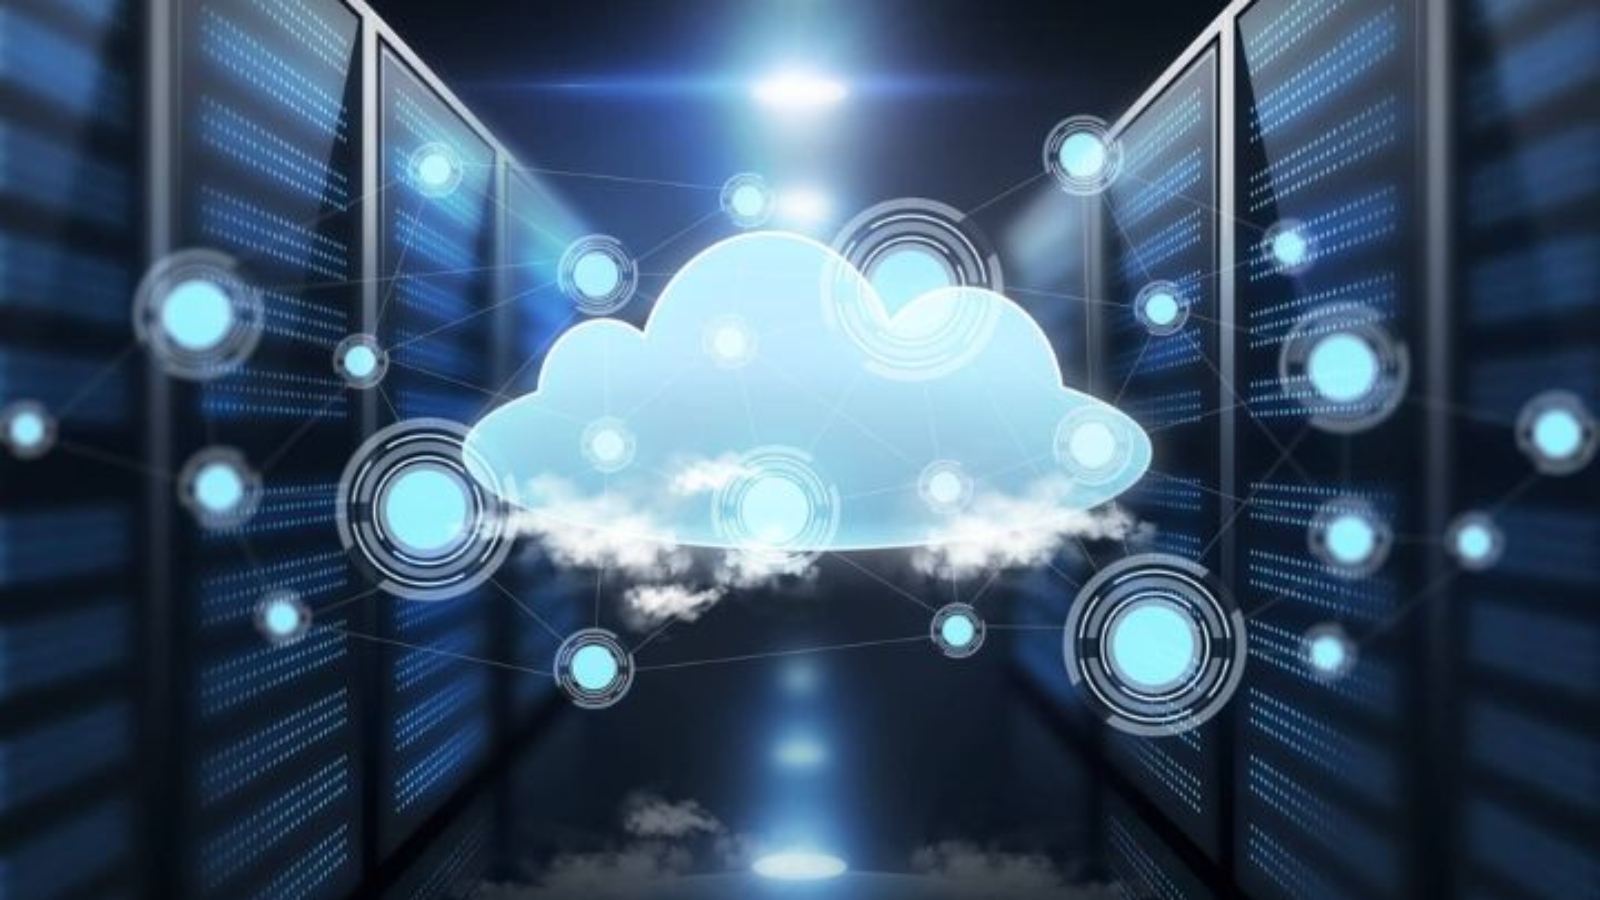 Top 7 most effective uses of cloud computing